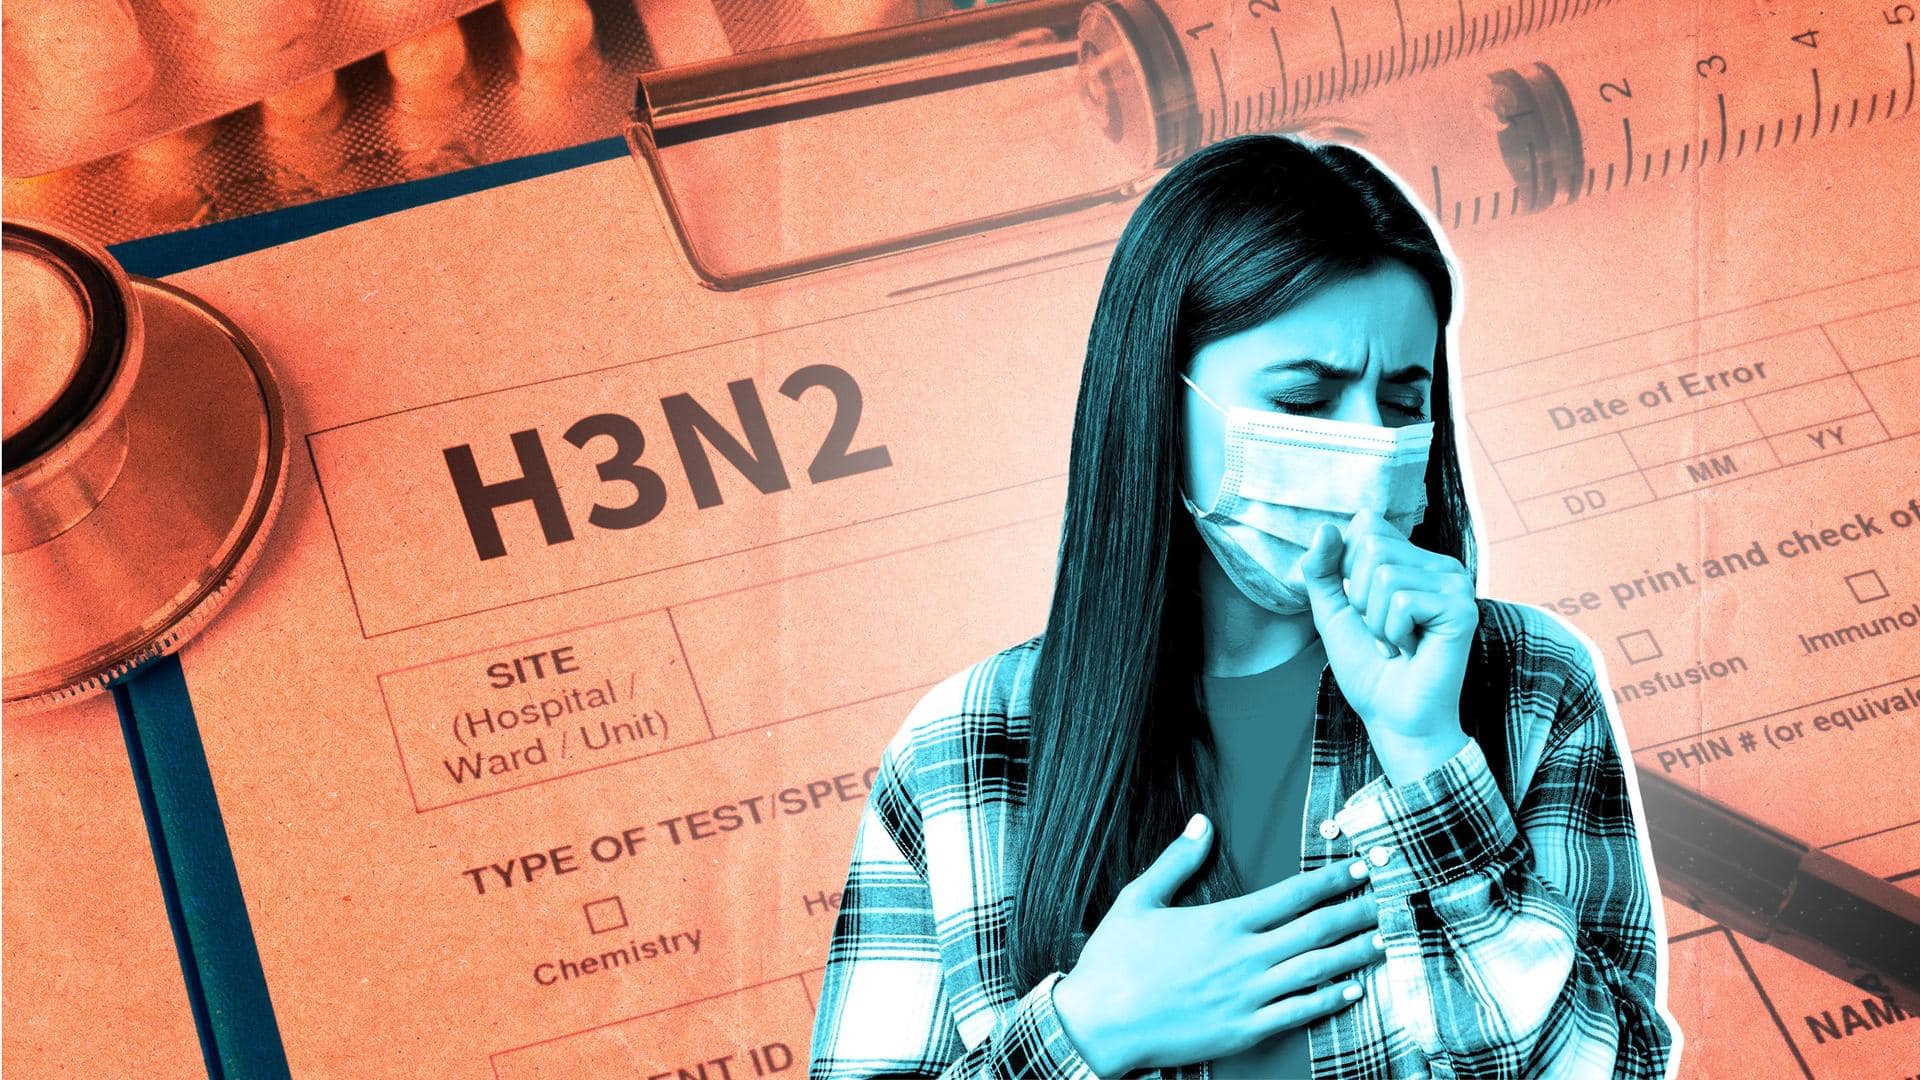 H3N2: Experts advise caution as deaths and ICU admissions rise